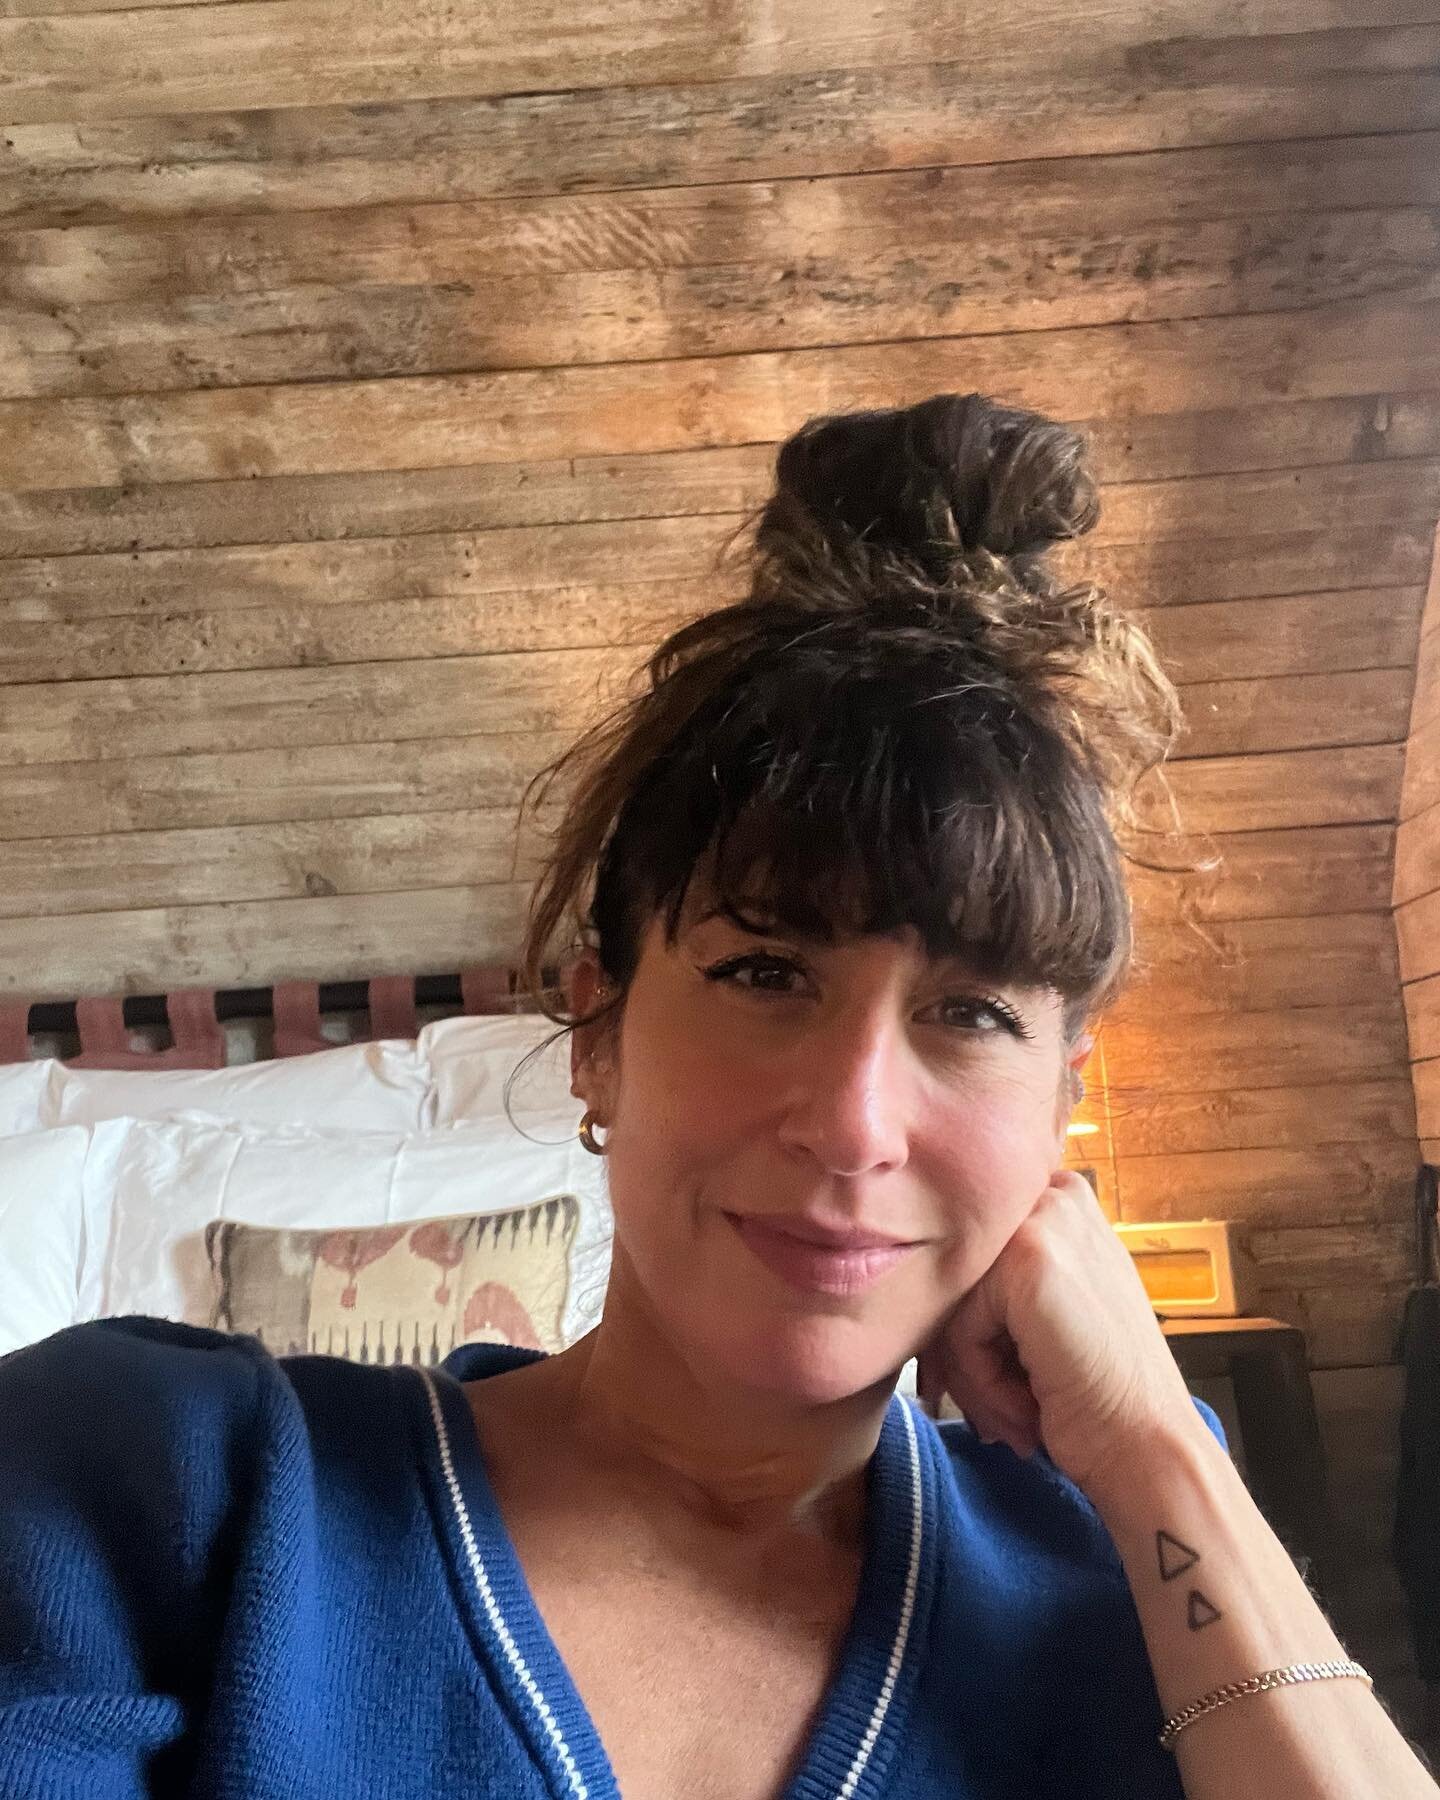 *This is 50*
Hi folks! A different kind of post for me. An unedited selfie of me on my 50th birthday. 🥳 and so the perfect day to say hi 👋
So here I am, Mum to two gorgeous girls, interior designer, product designer (as of this year), avid netball 